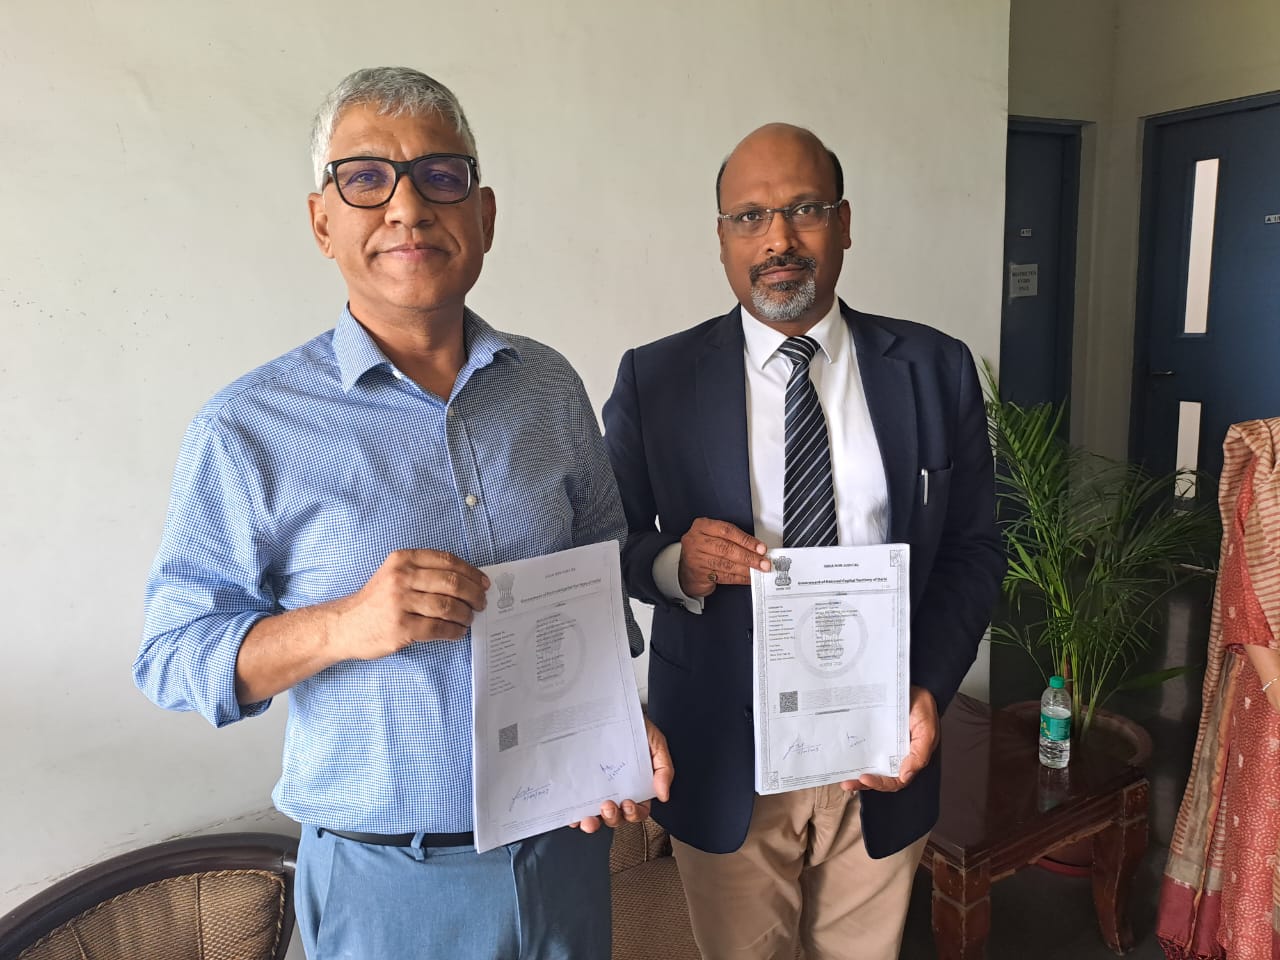 iim-kashipur-inks-mou-with-max-healthcare-to-launch-programme-in-hospital-management